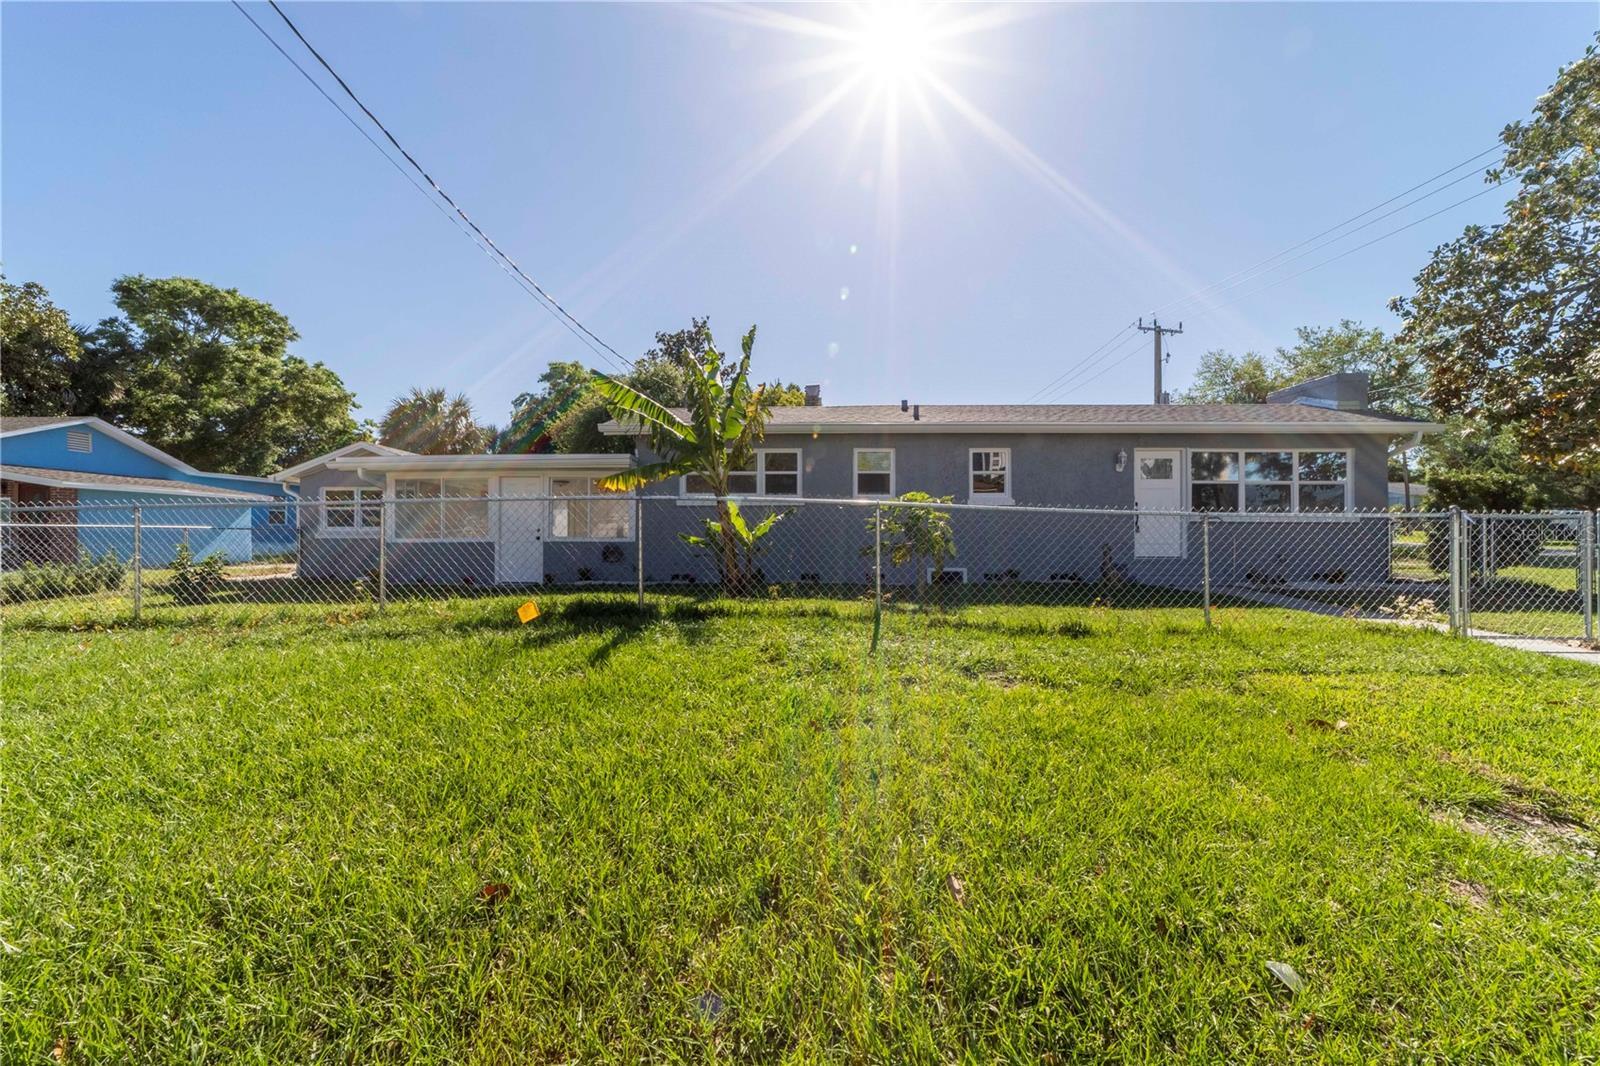 Photo one of 154 Burleigh Ave Holly Hill FL 32117 | MLS O6193769